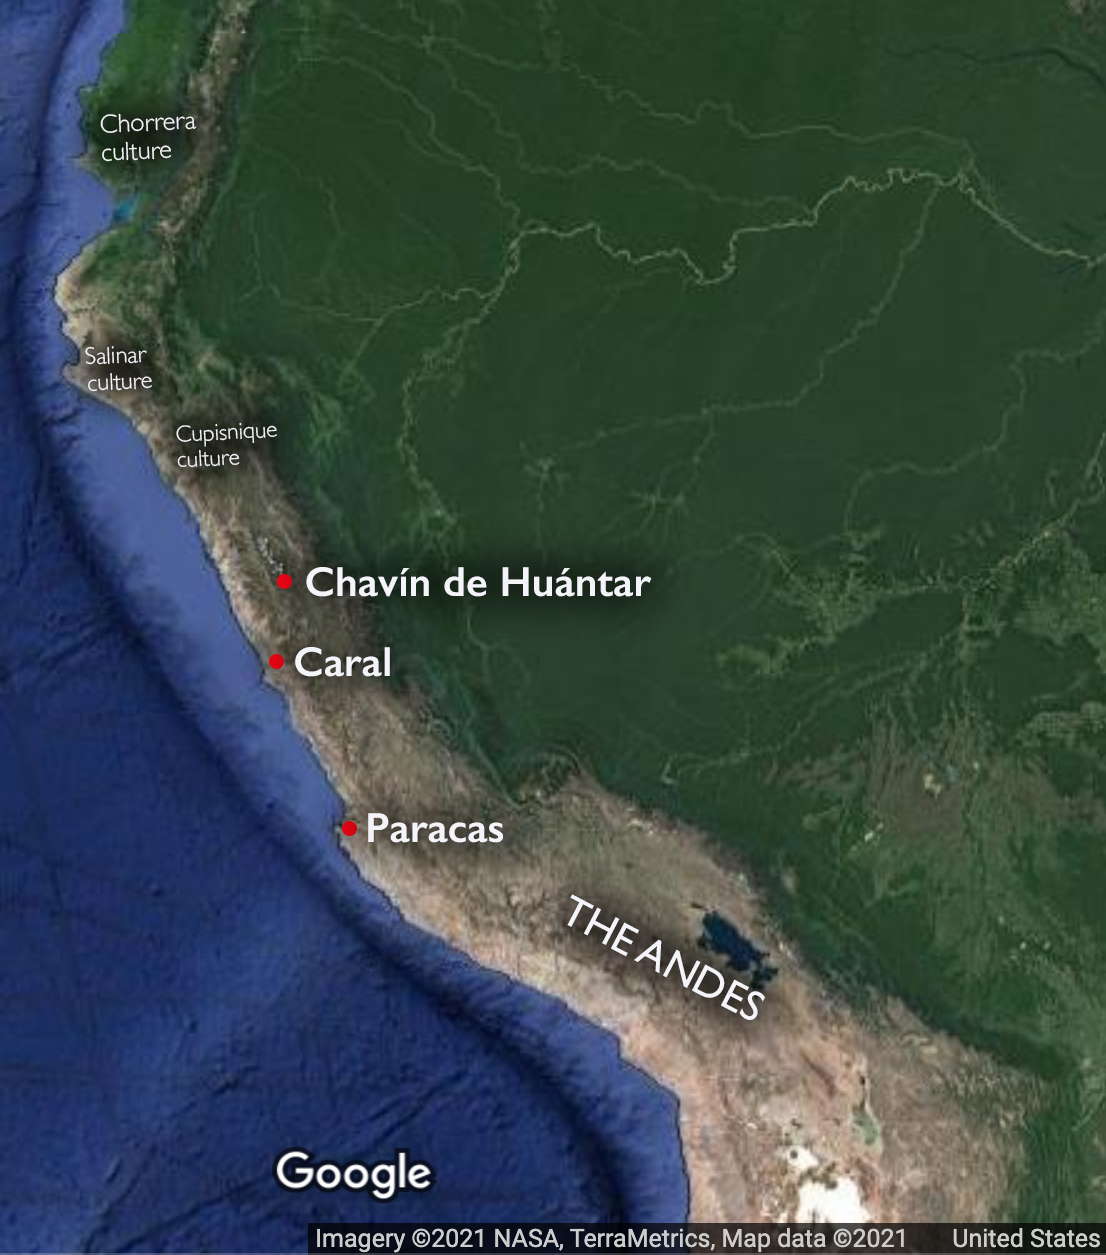 Peru and Ecuador with early cultures indicated (underlying map © Google)